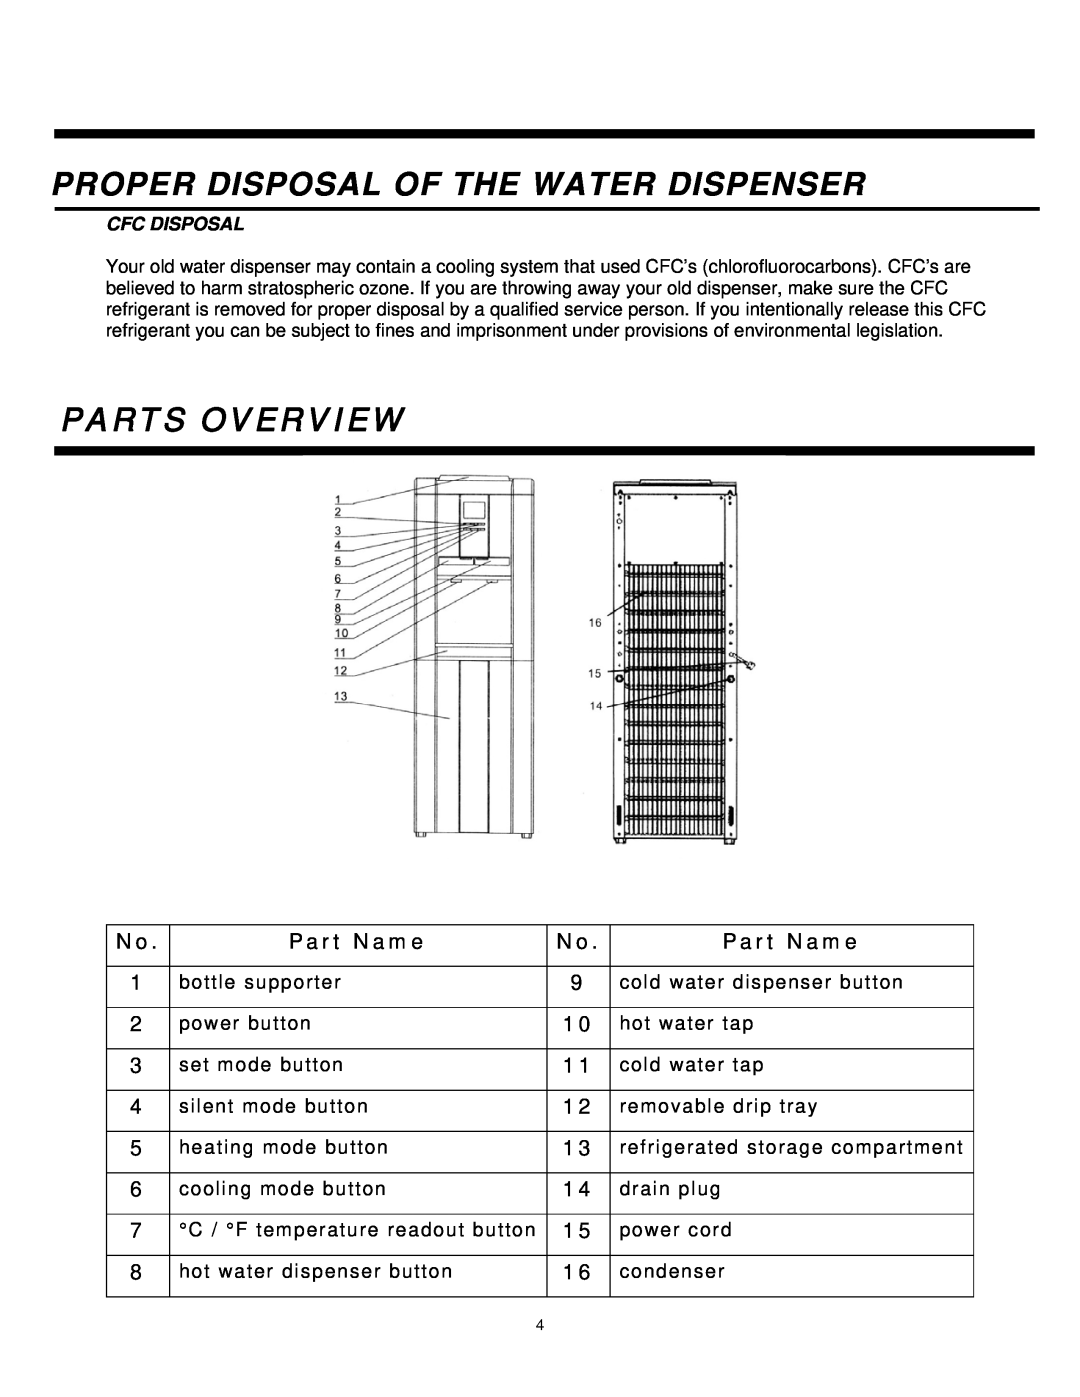 Sylvania SE80092 instruction manual Proper Disposal Of The Water Dispenser, Parts Overview 